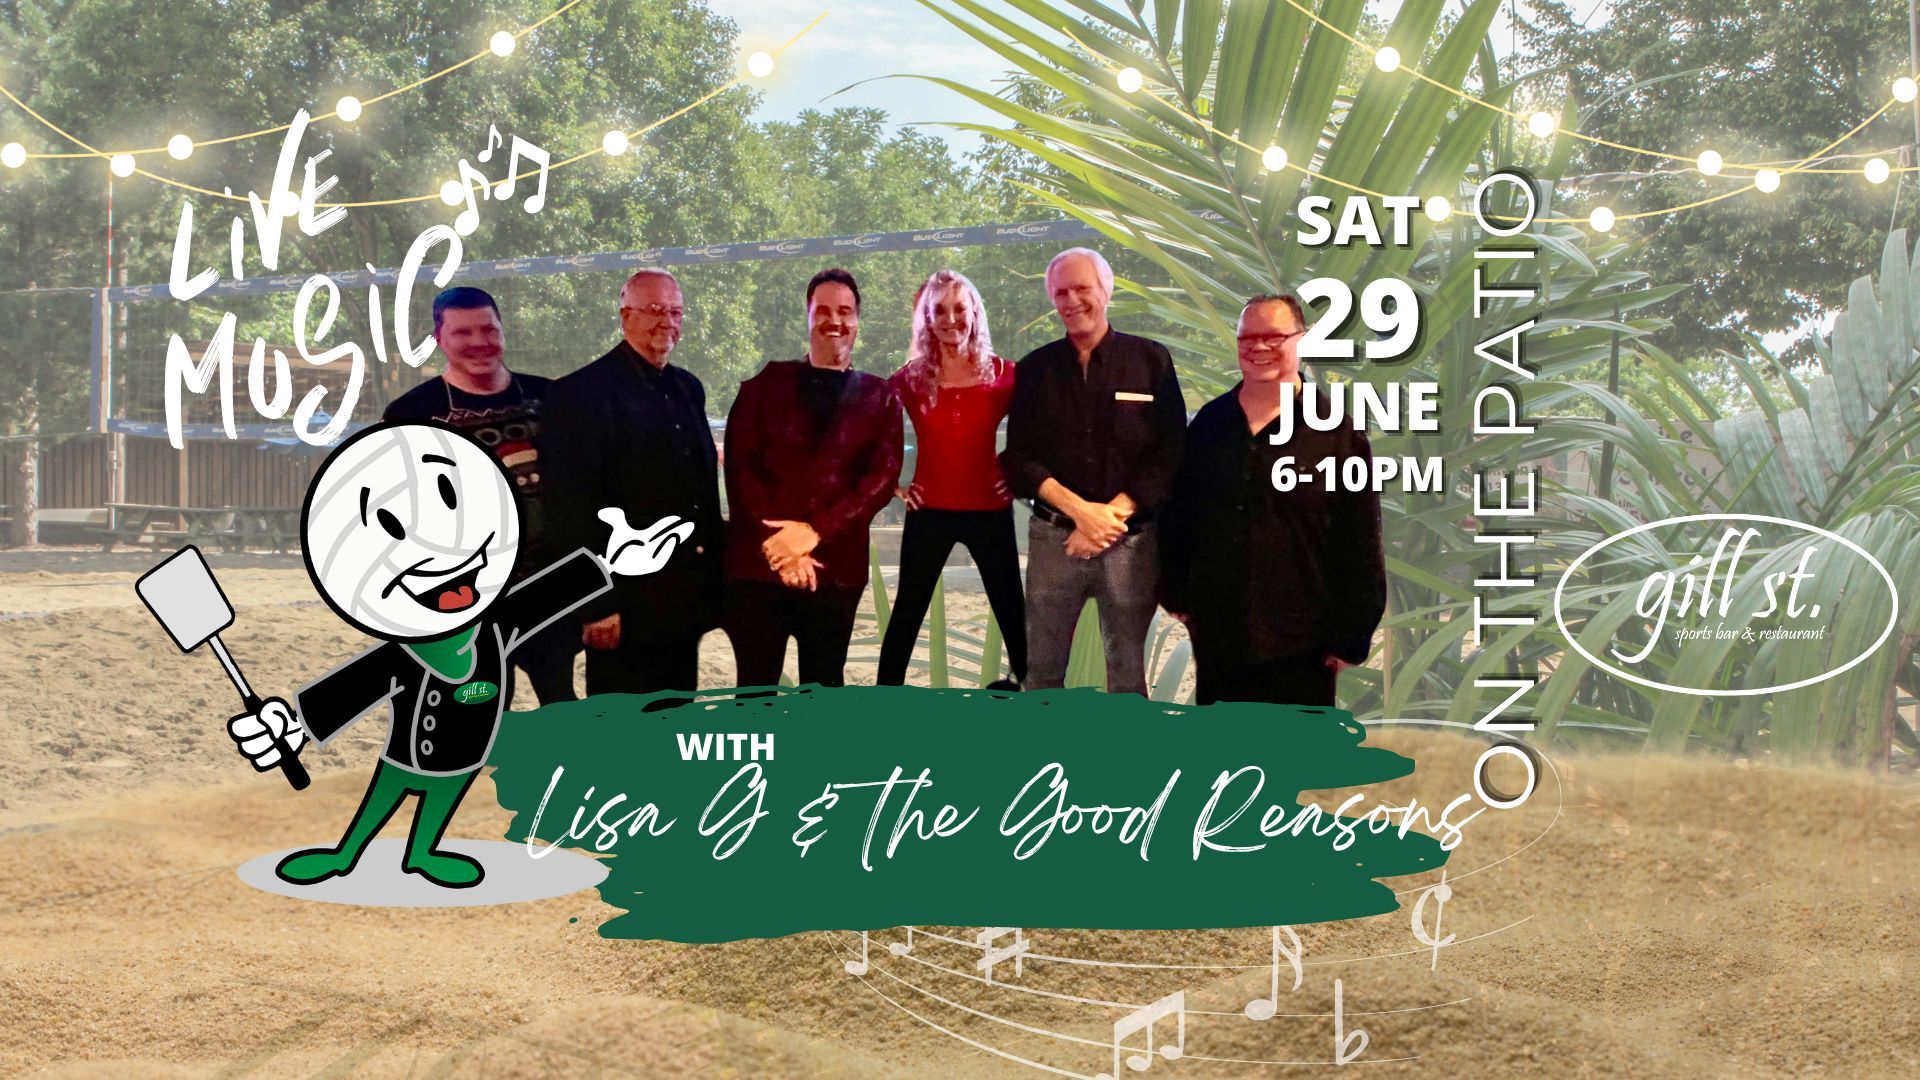 Live Music with Lisa G & the Good Reasons